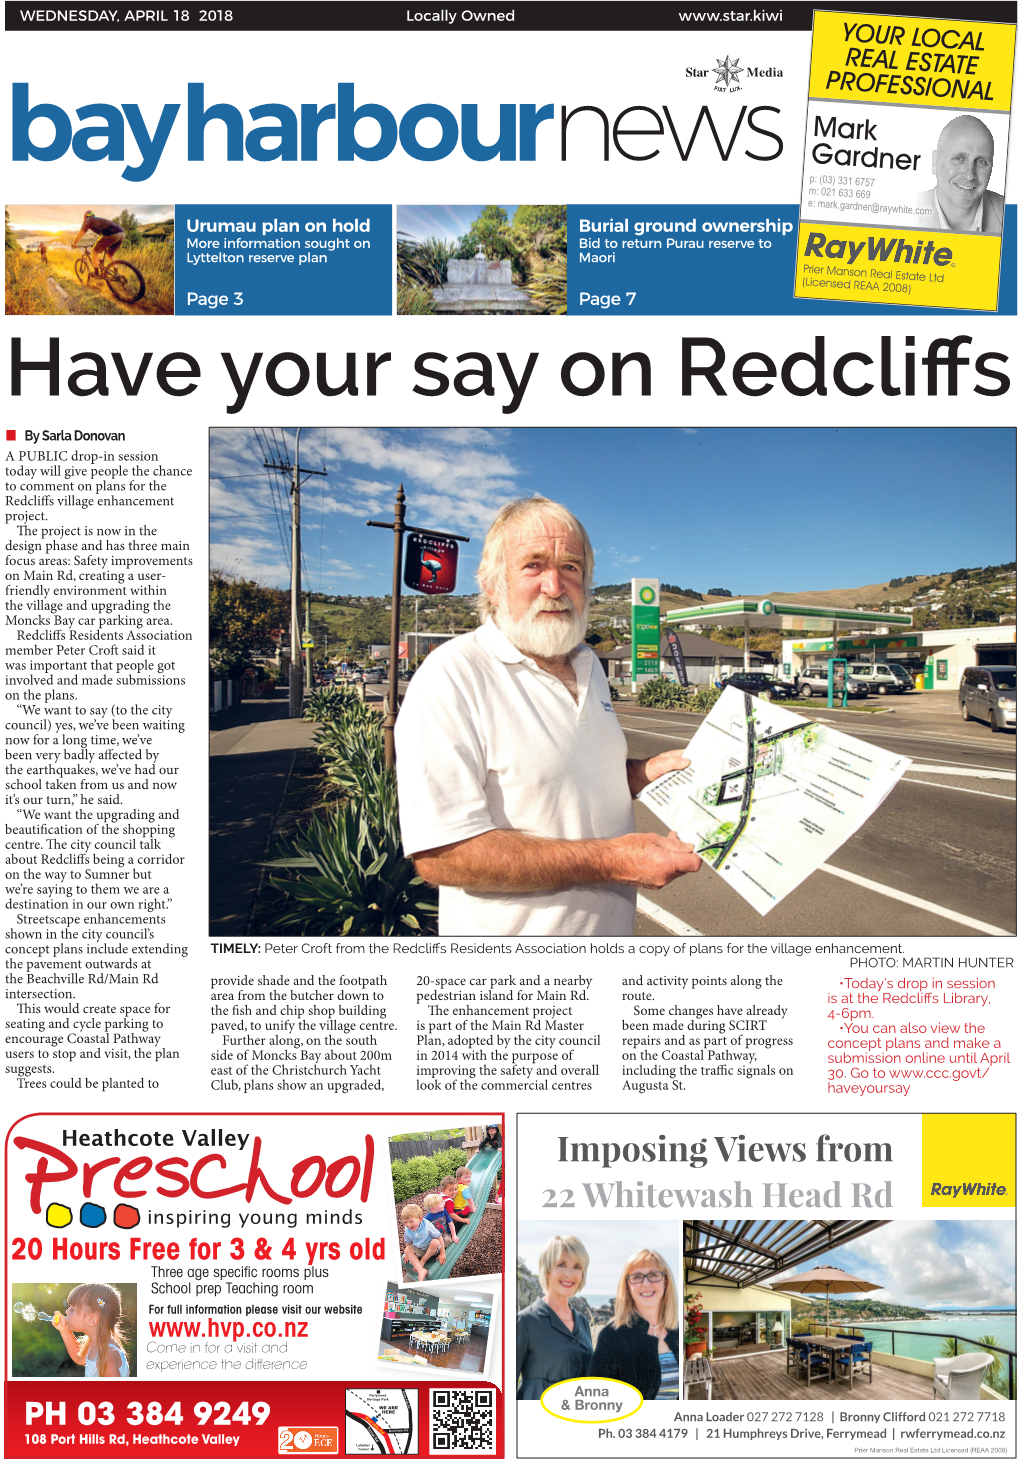 Have Your Say on Redcliffs